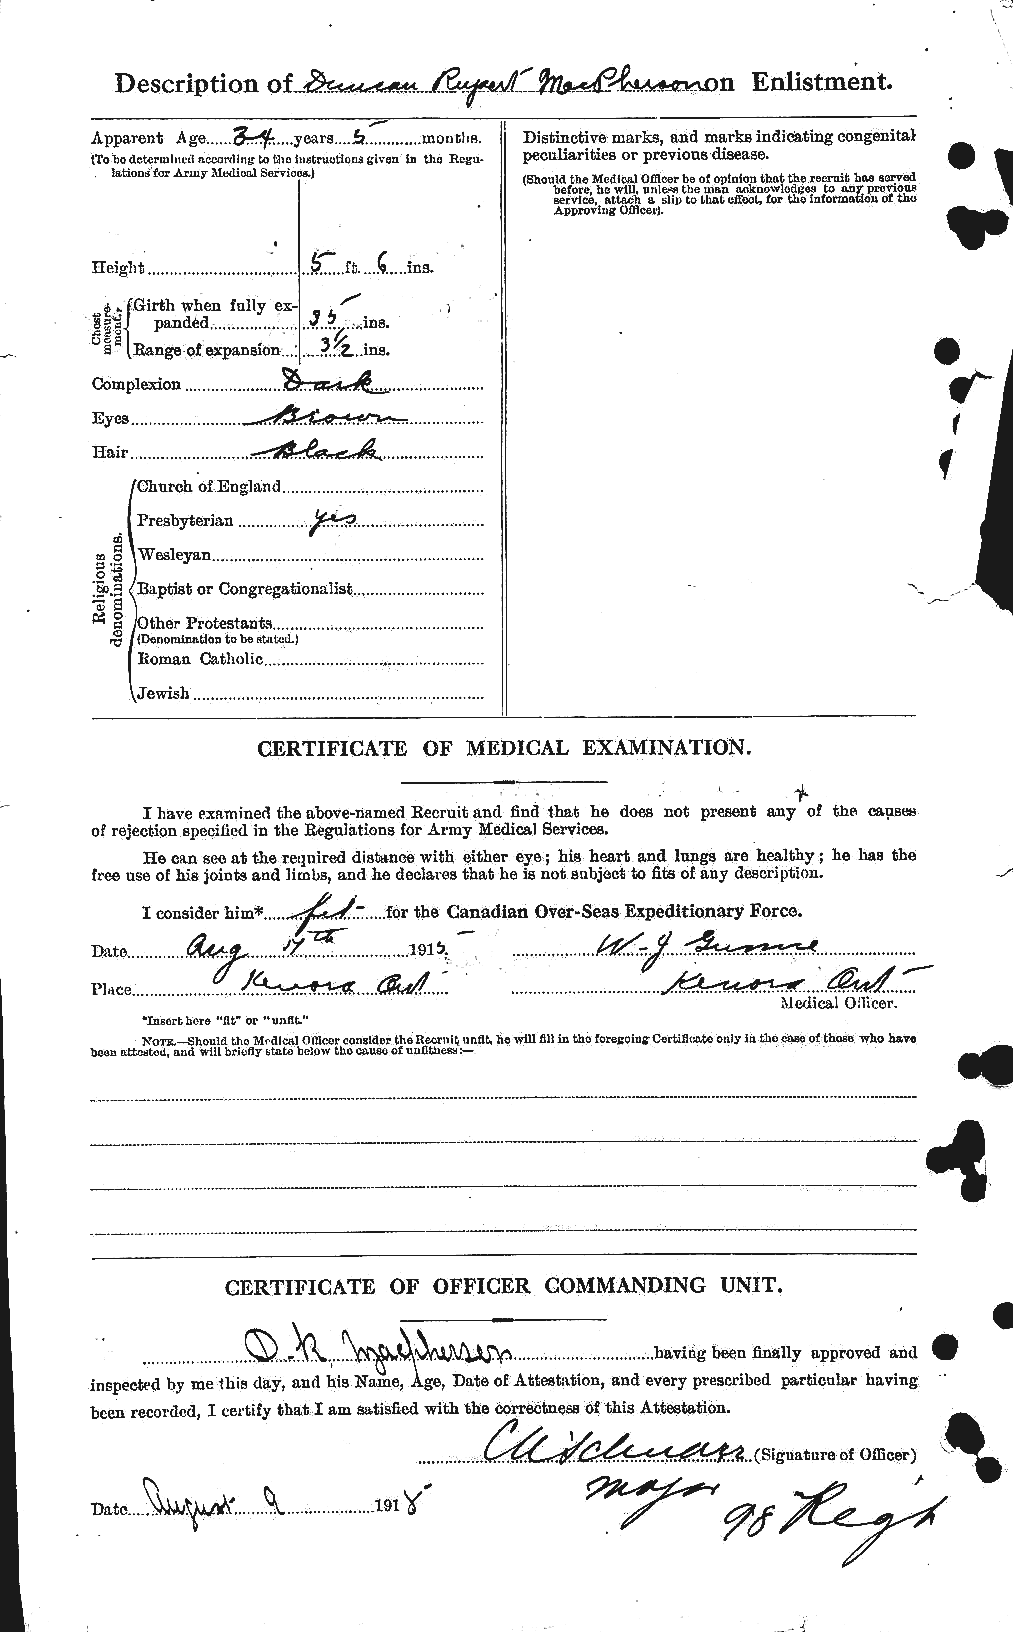 Personnel Records of the First World War - CEF 541517b